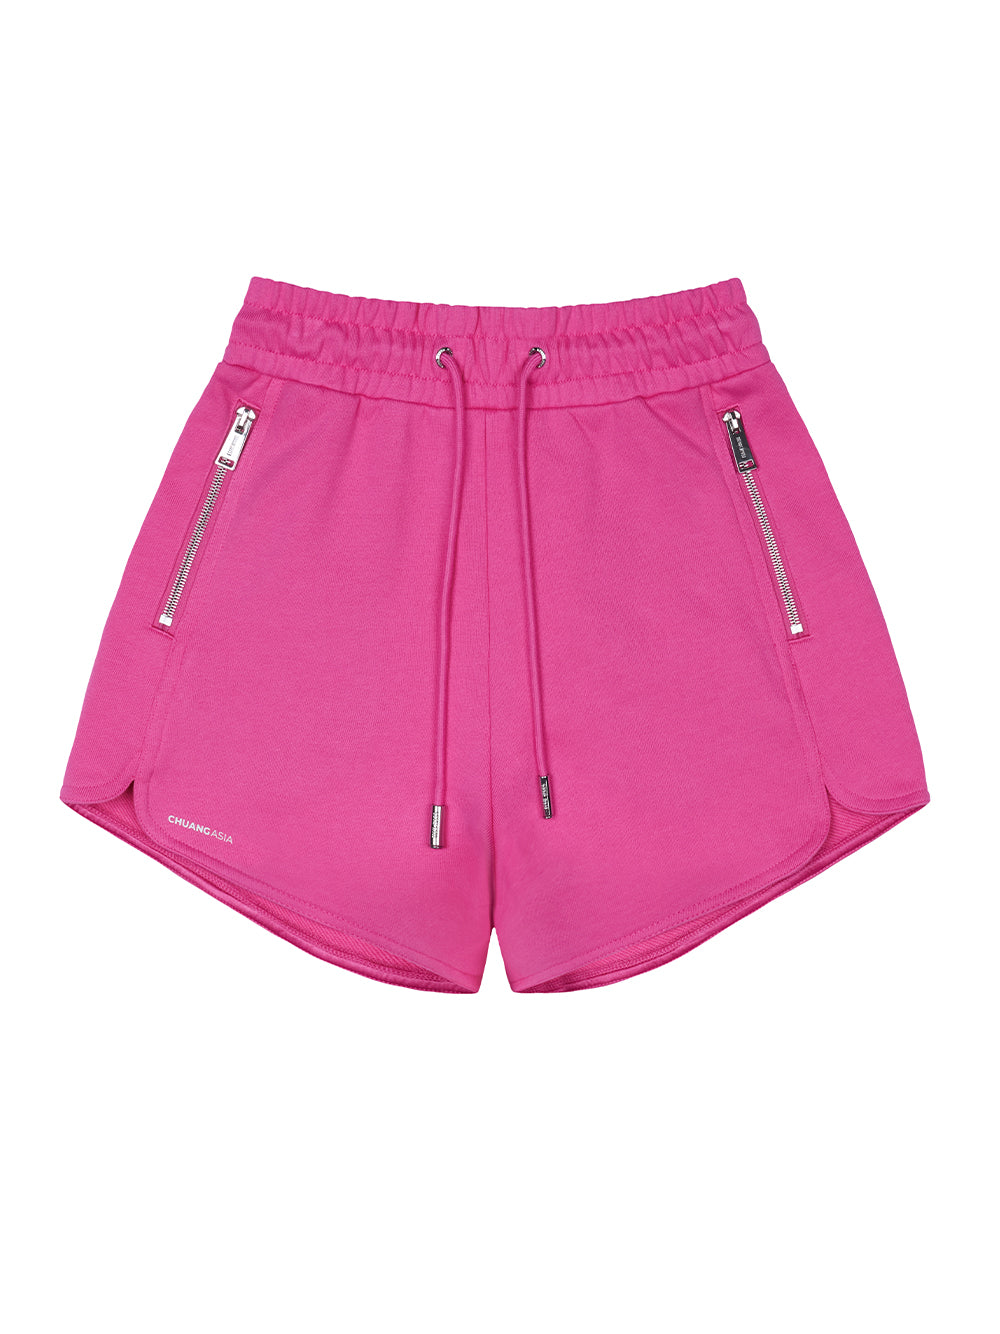 TEAM WANG design x CHUANG ASIA Jersey Casual Shorts (Rose Red)